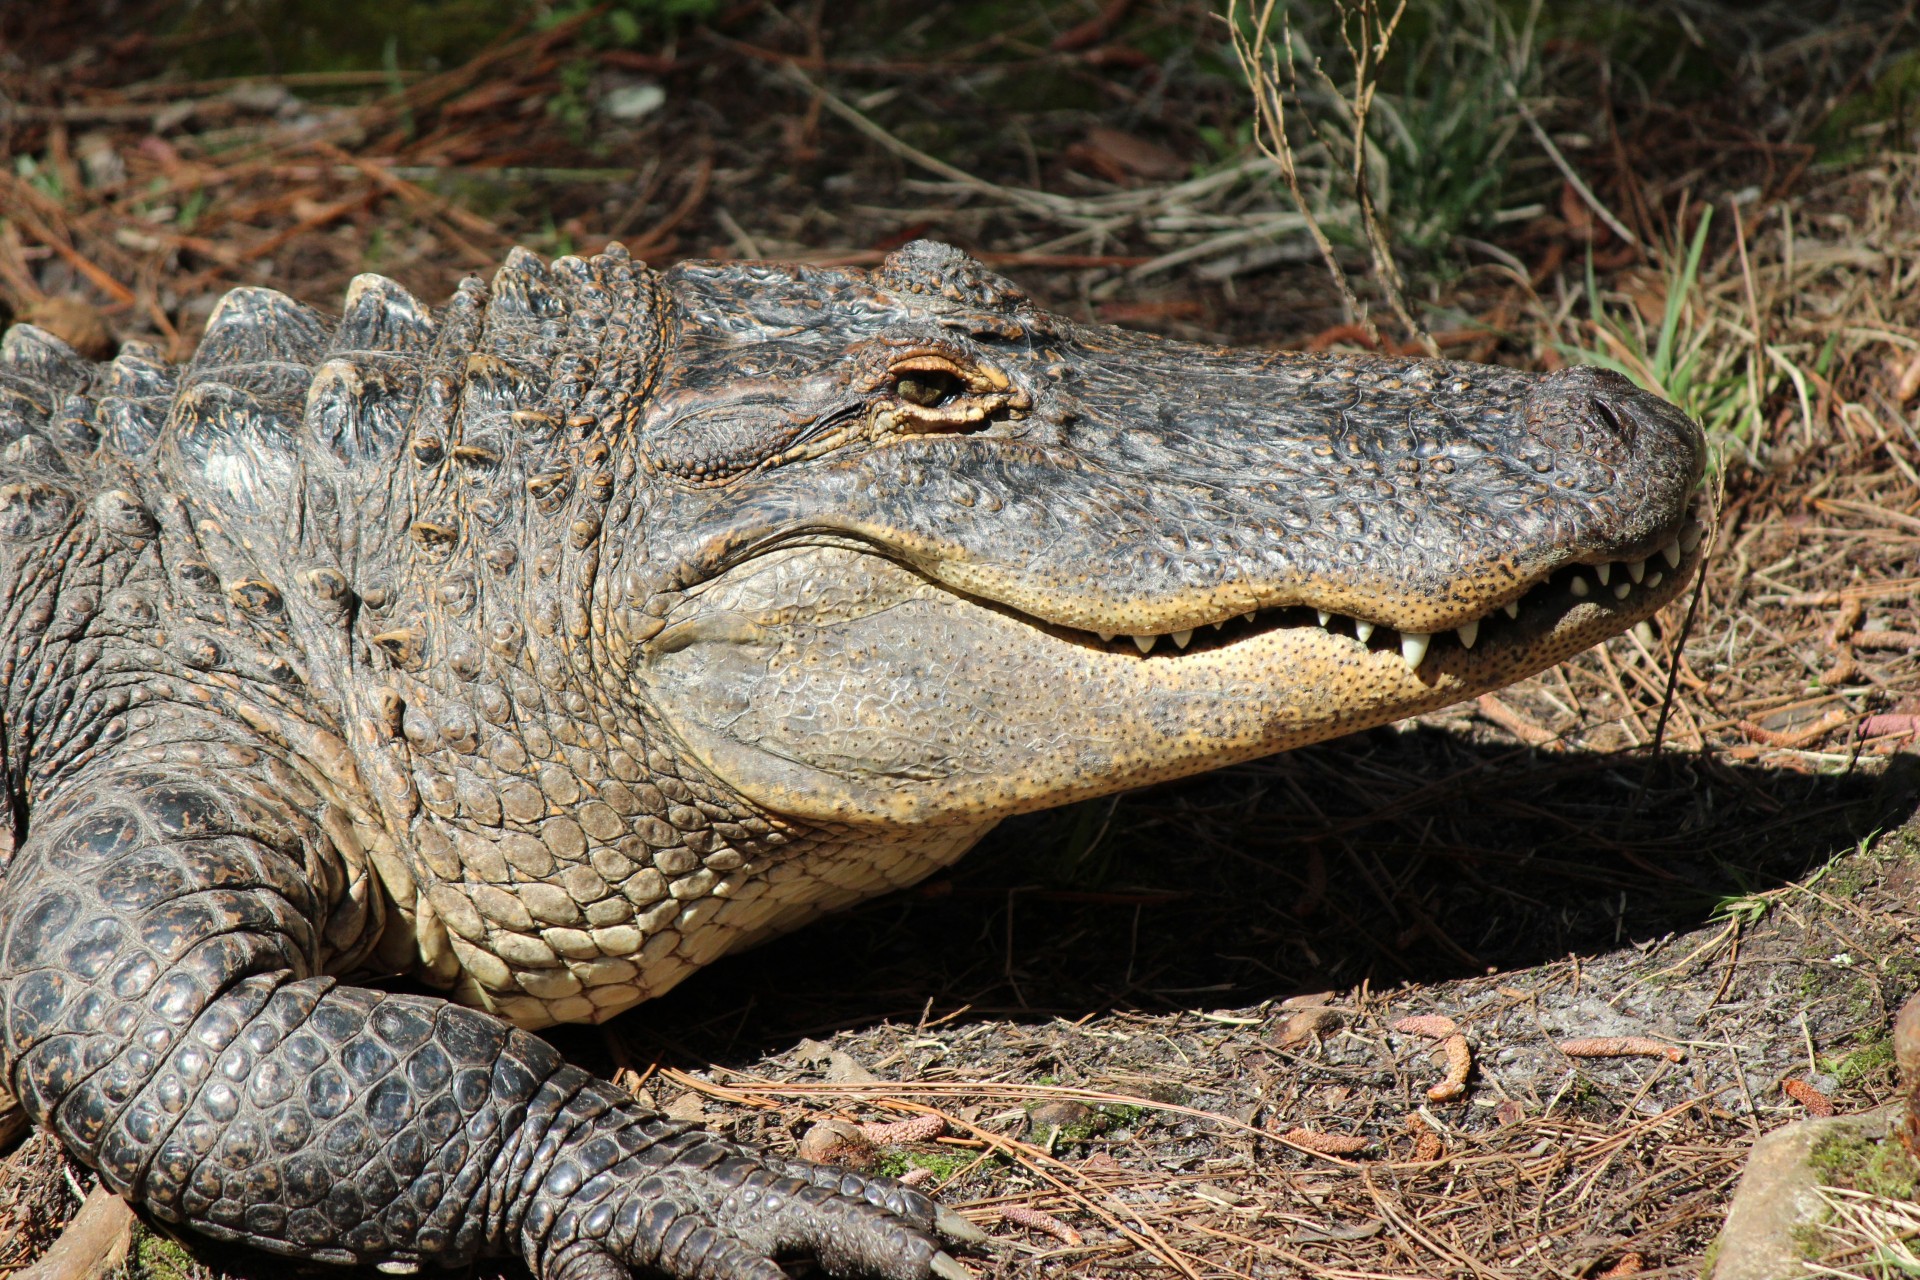 a closeup on a alligators head with large teeth, and detail skin.